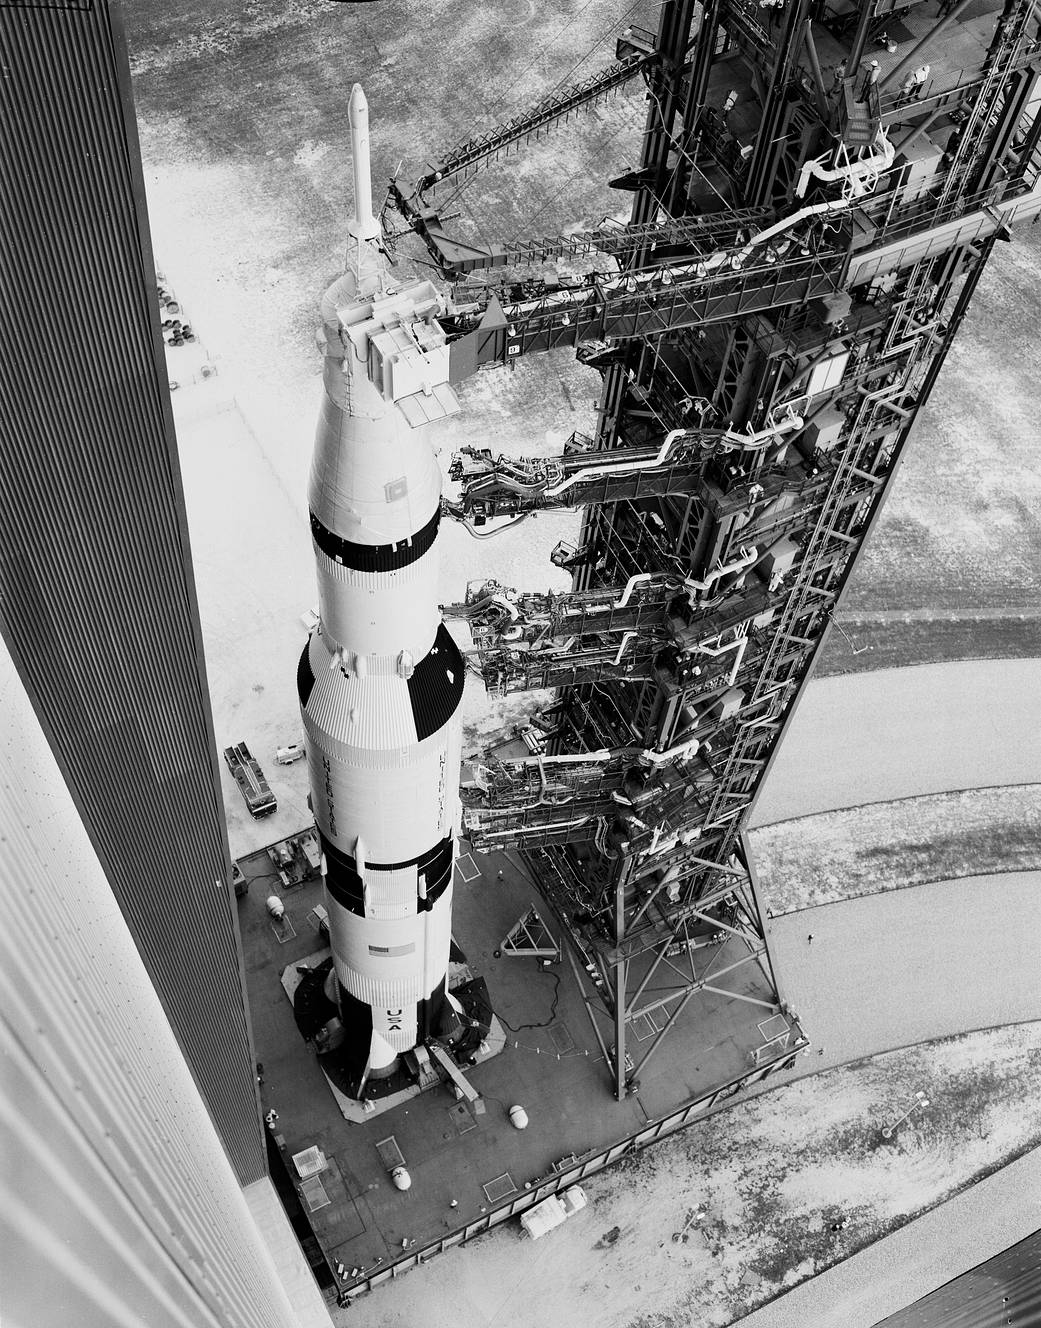 Fifty years ago today, Apollo 6 launched from NASA’s Kennedy Space Center. 